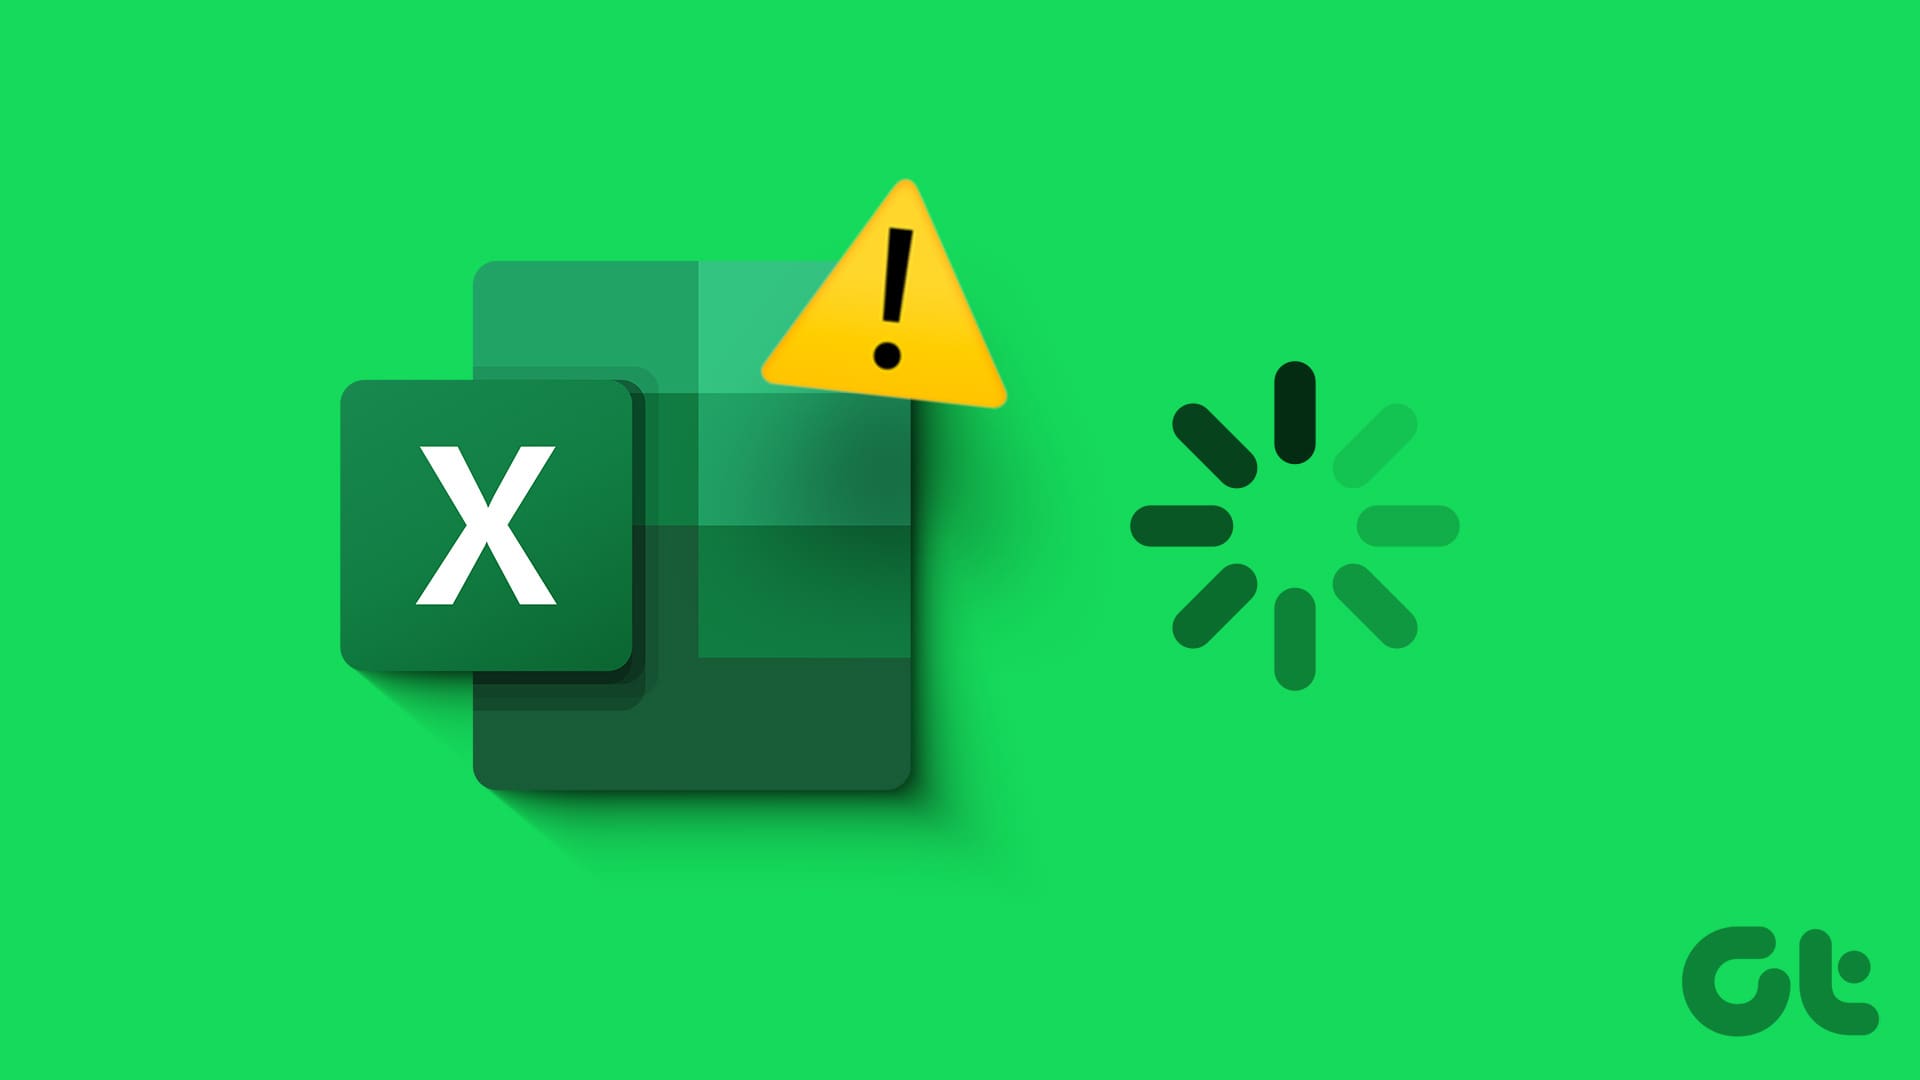 Top 8 Ways to Fix Microsoft Excel Stuck at Starting on Windows 11